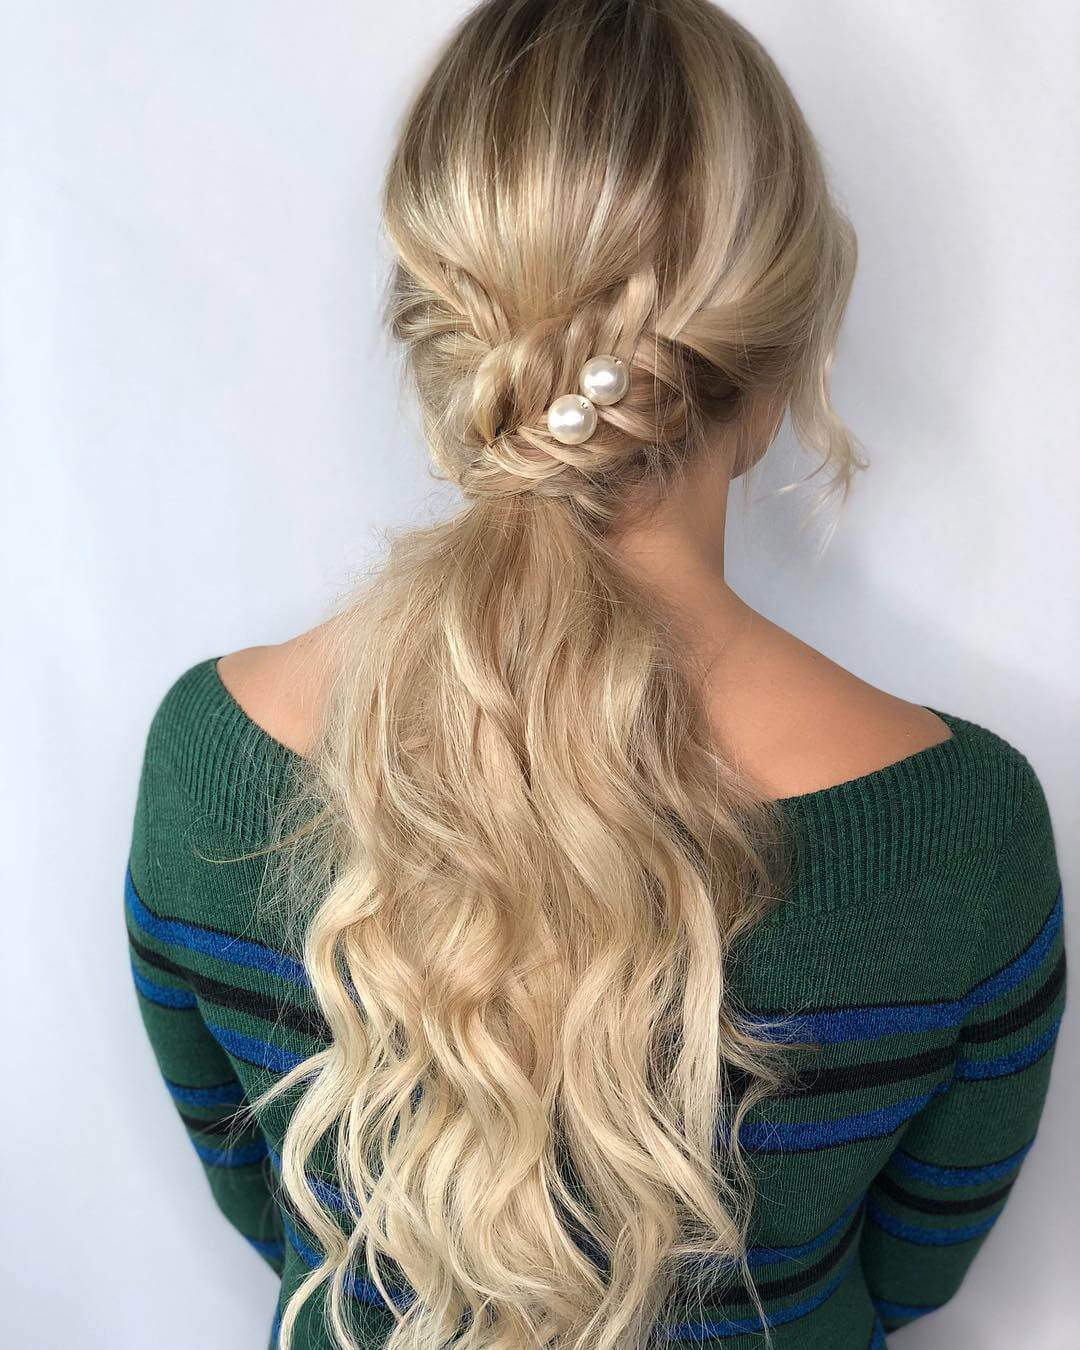 Braided Low Ponytail with Pearls Low Ponytail Hairstyle Ideas